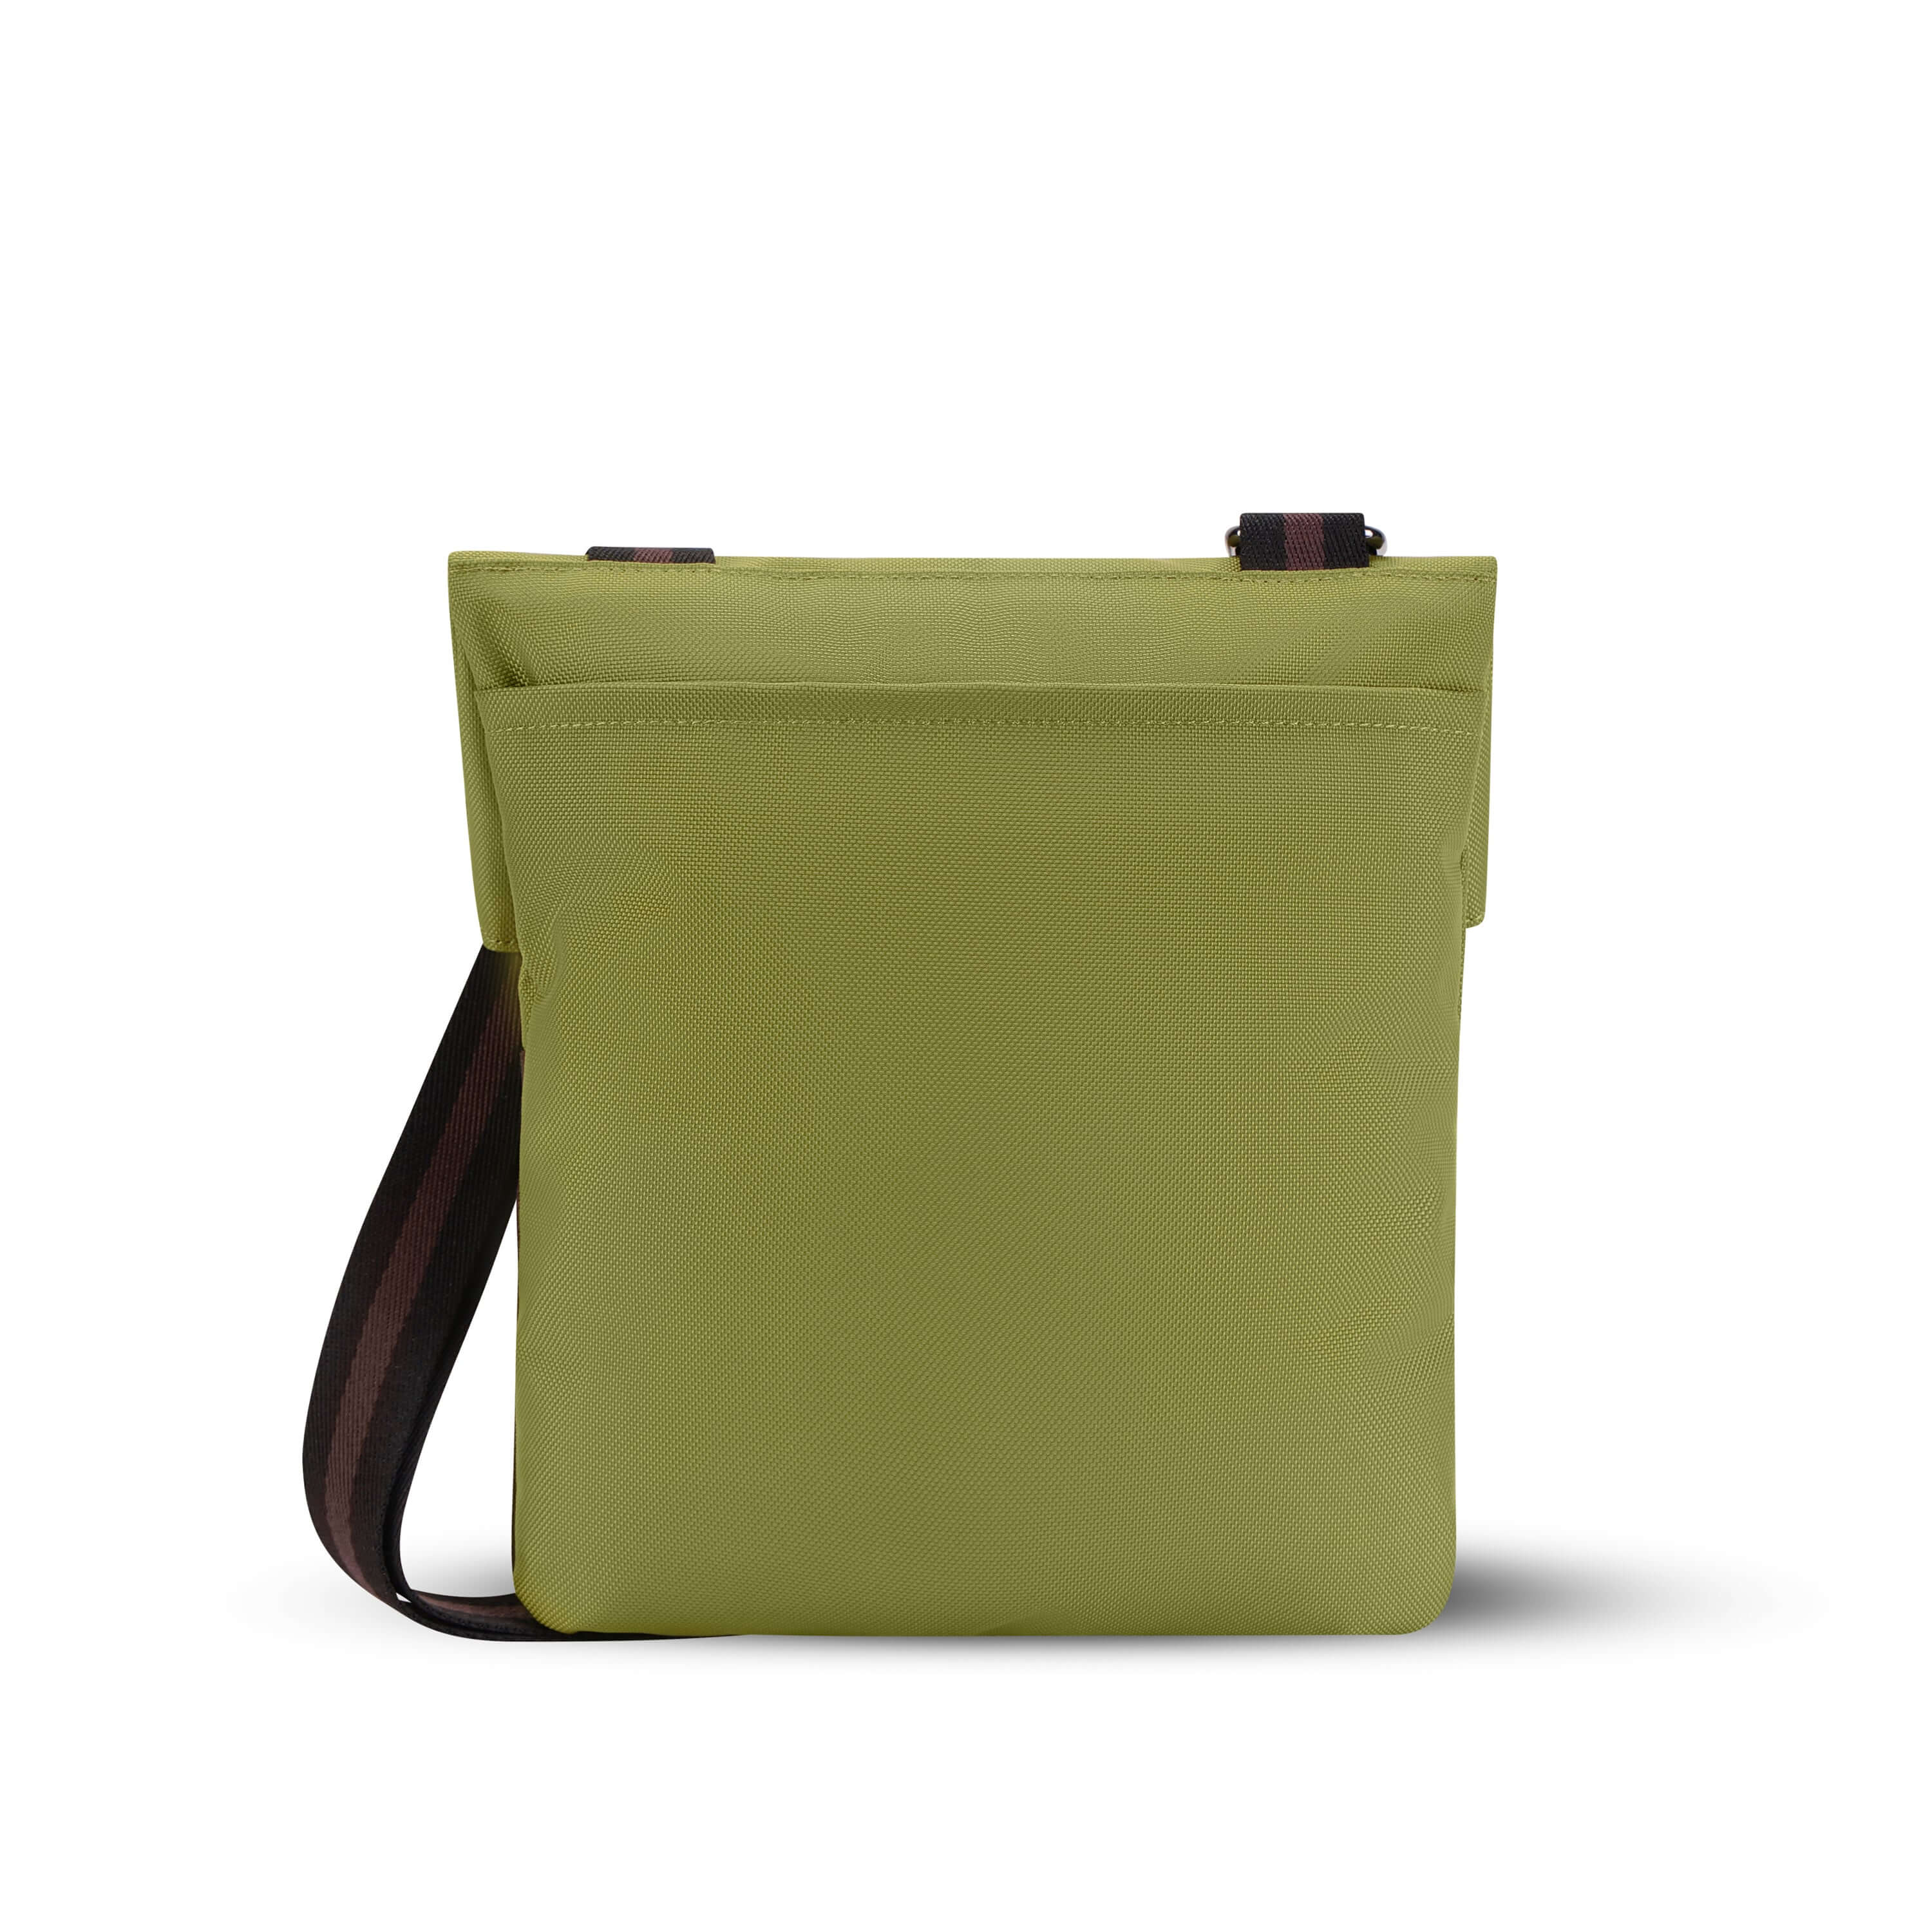 Back view of Sherpani crossbody, the Pica in Cactus. The back of the bag features an external pouch.